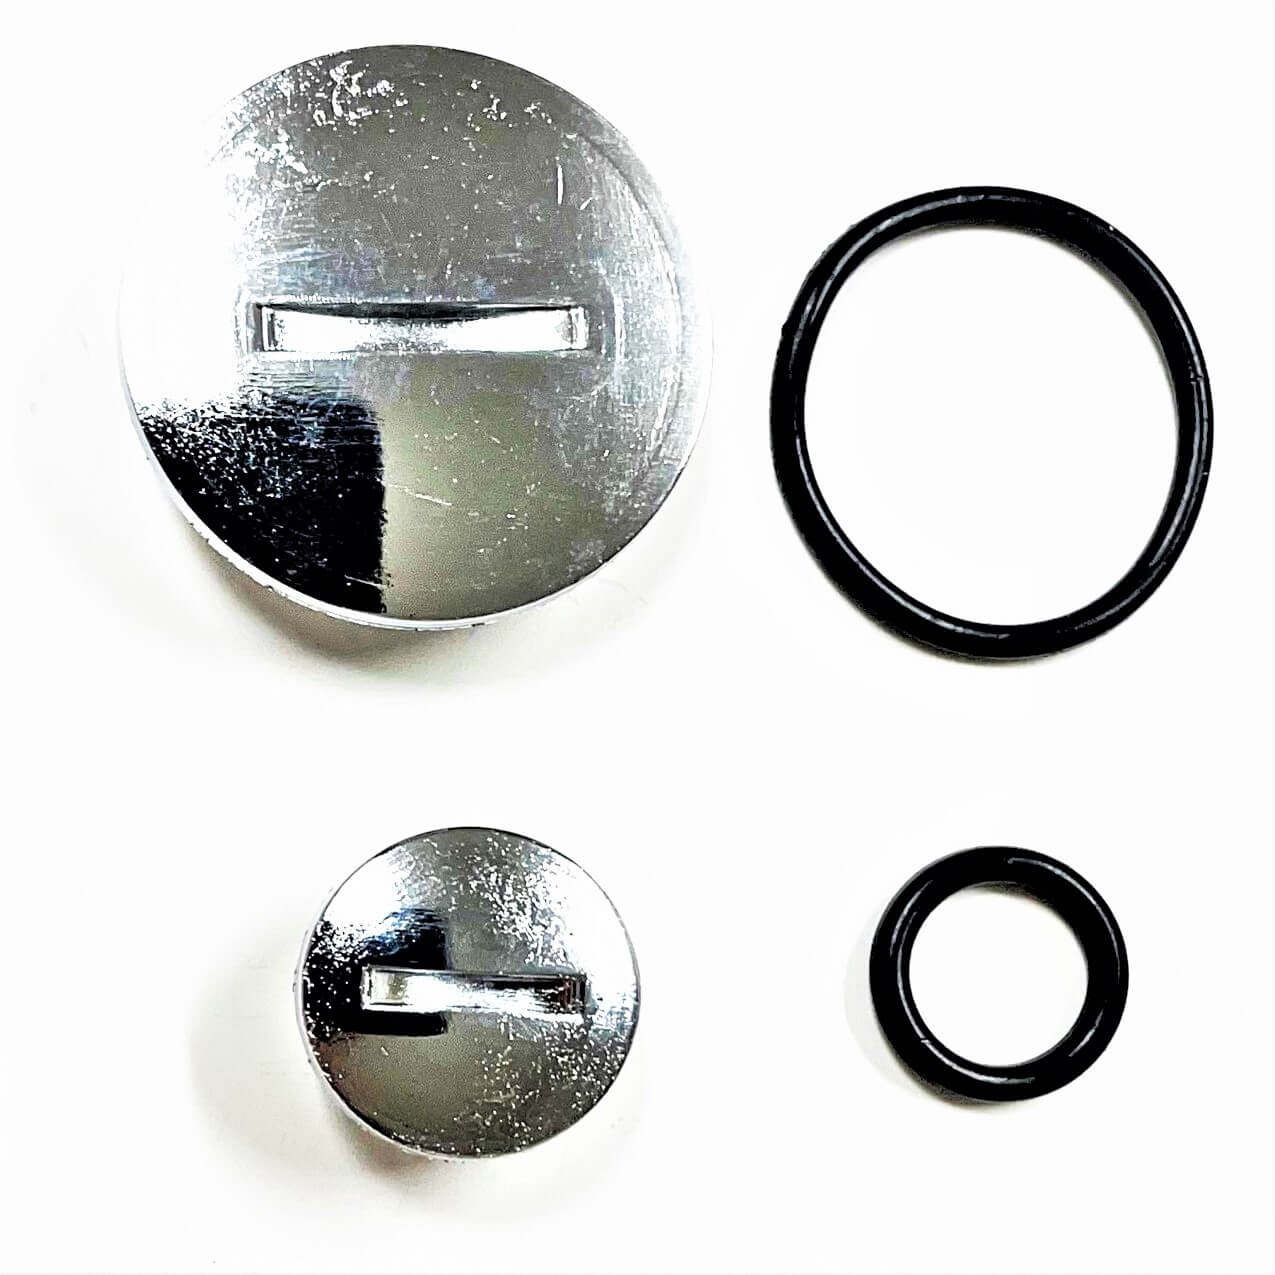 DUST COVER SCREW Kit Fits 50-125cc ATVs & Dirtbikes. Large Cap OD=36mm, Small Cap OD=21mm - Click Image to Close